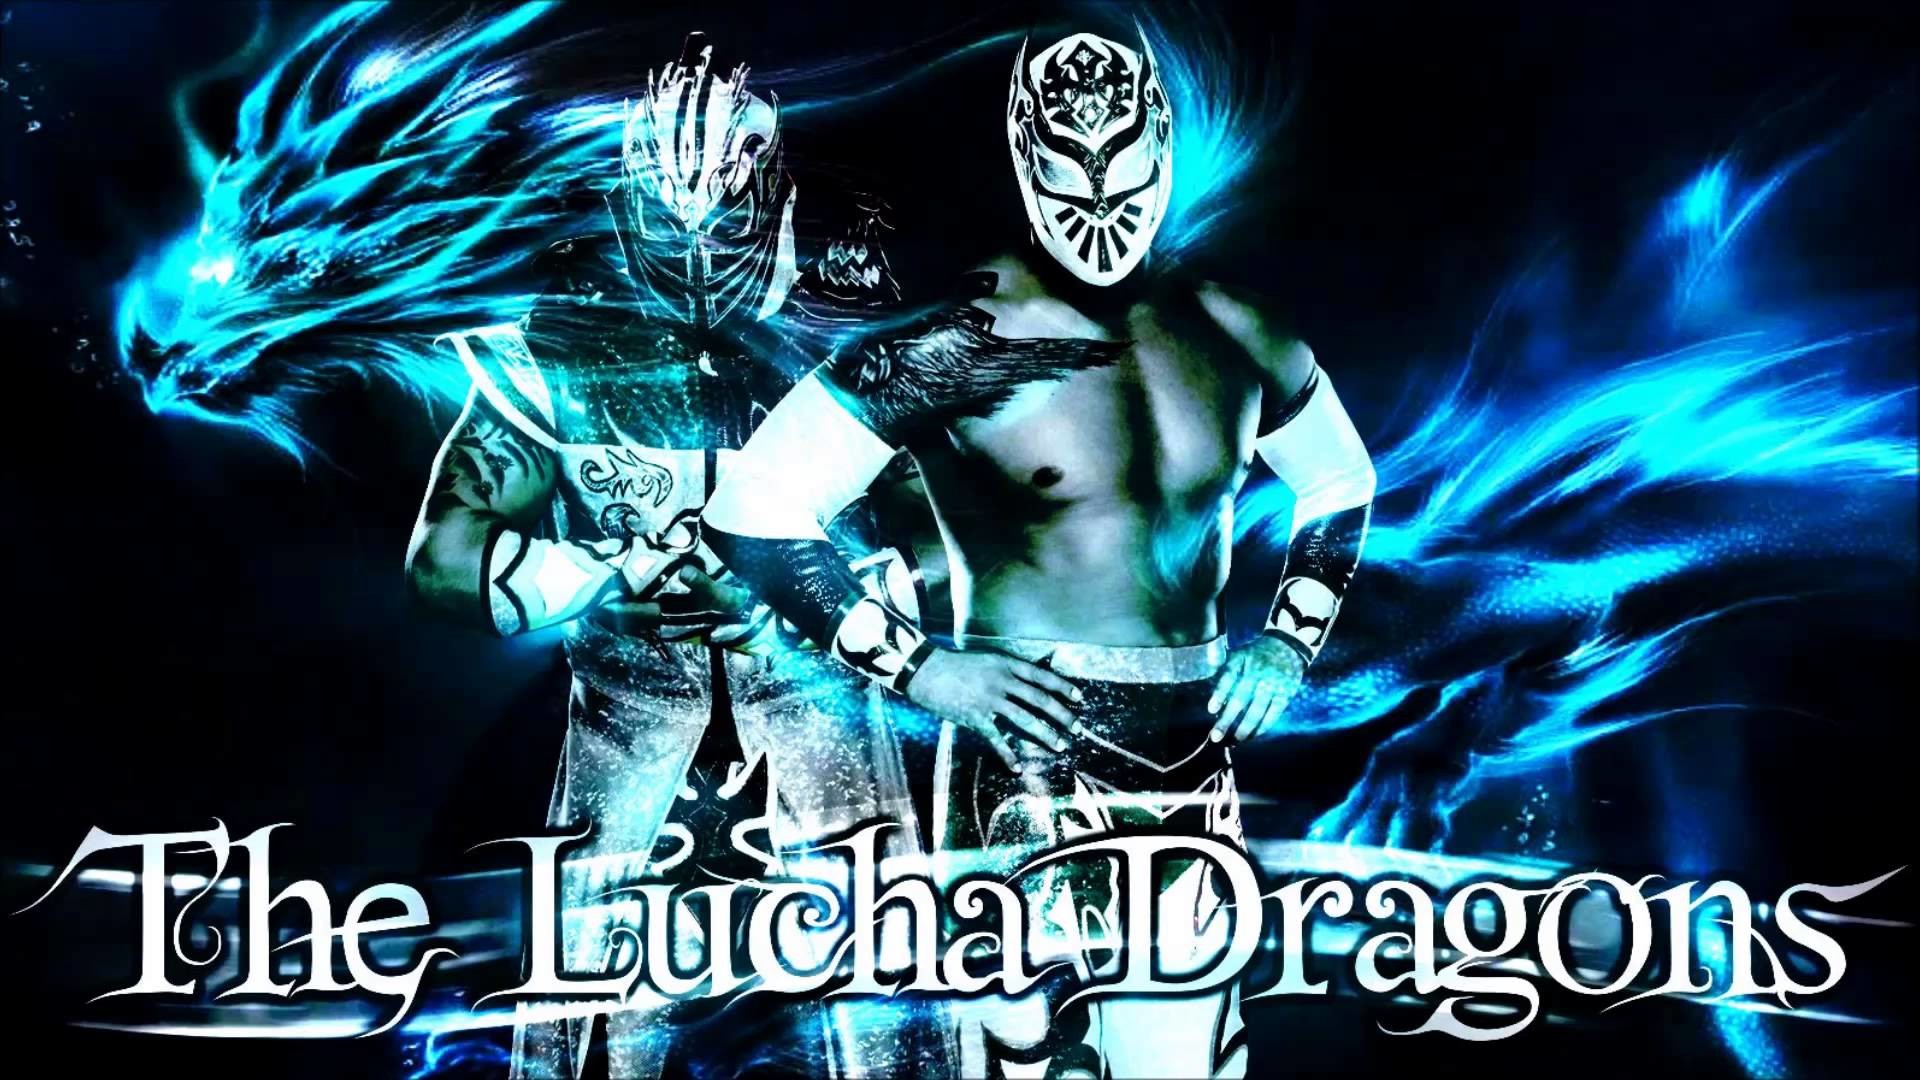 1920x1080 WWE kalisto HD Wallpapers & Pictures | Live HD Wallpaper HQ .